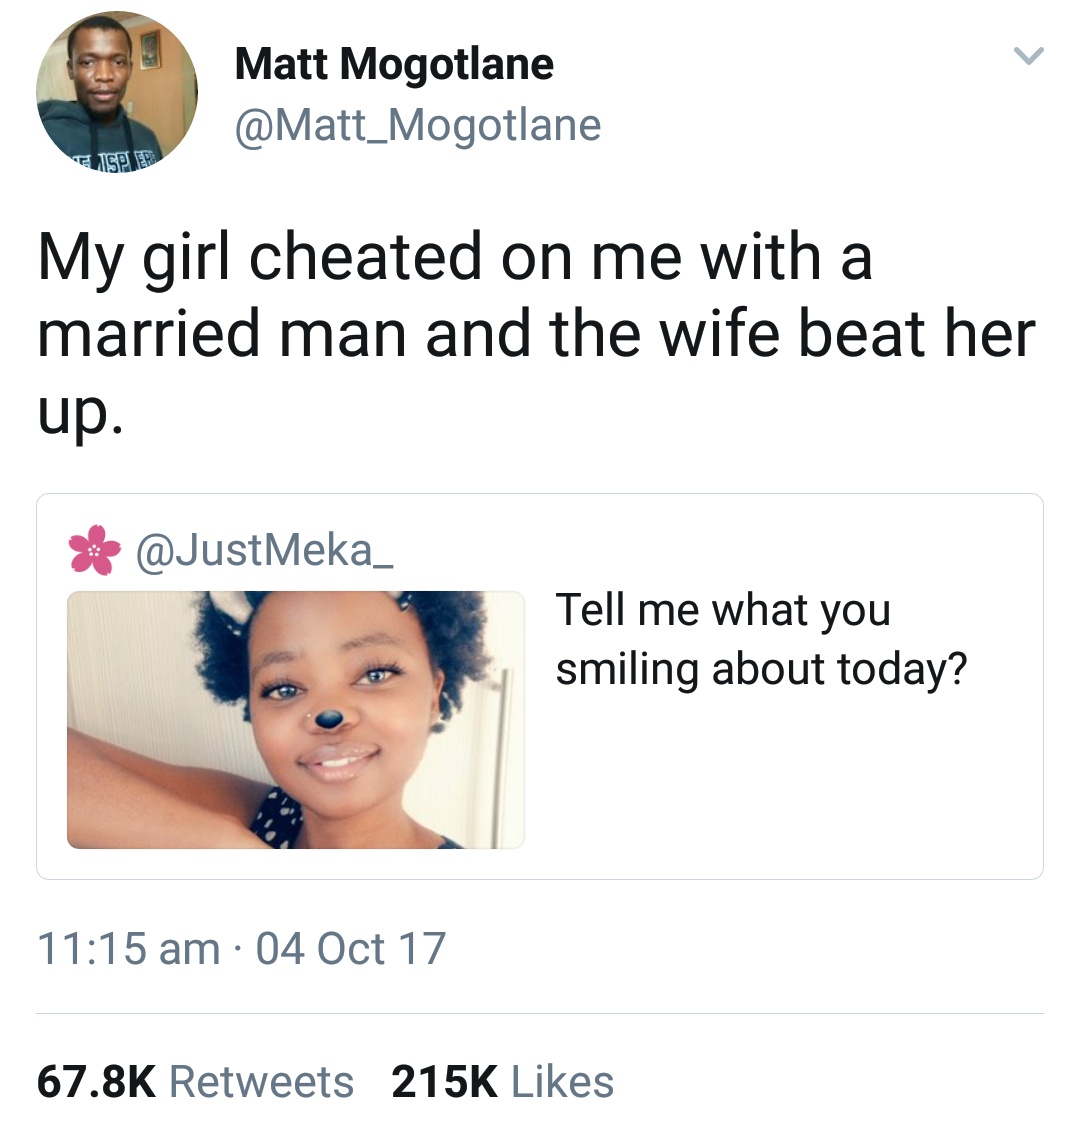 girls liking married man - Matt Mogotlane Eltsper My girl cheated on me with a married man and the wife beat her up. Tell me what you smiling about today? 04 Oct 17